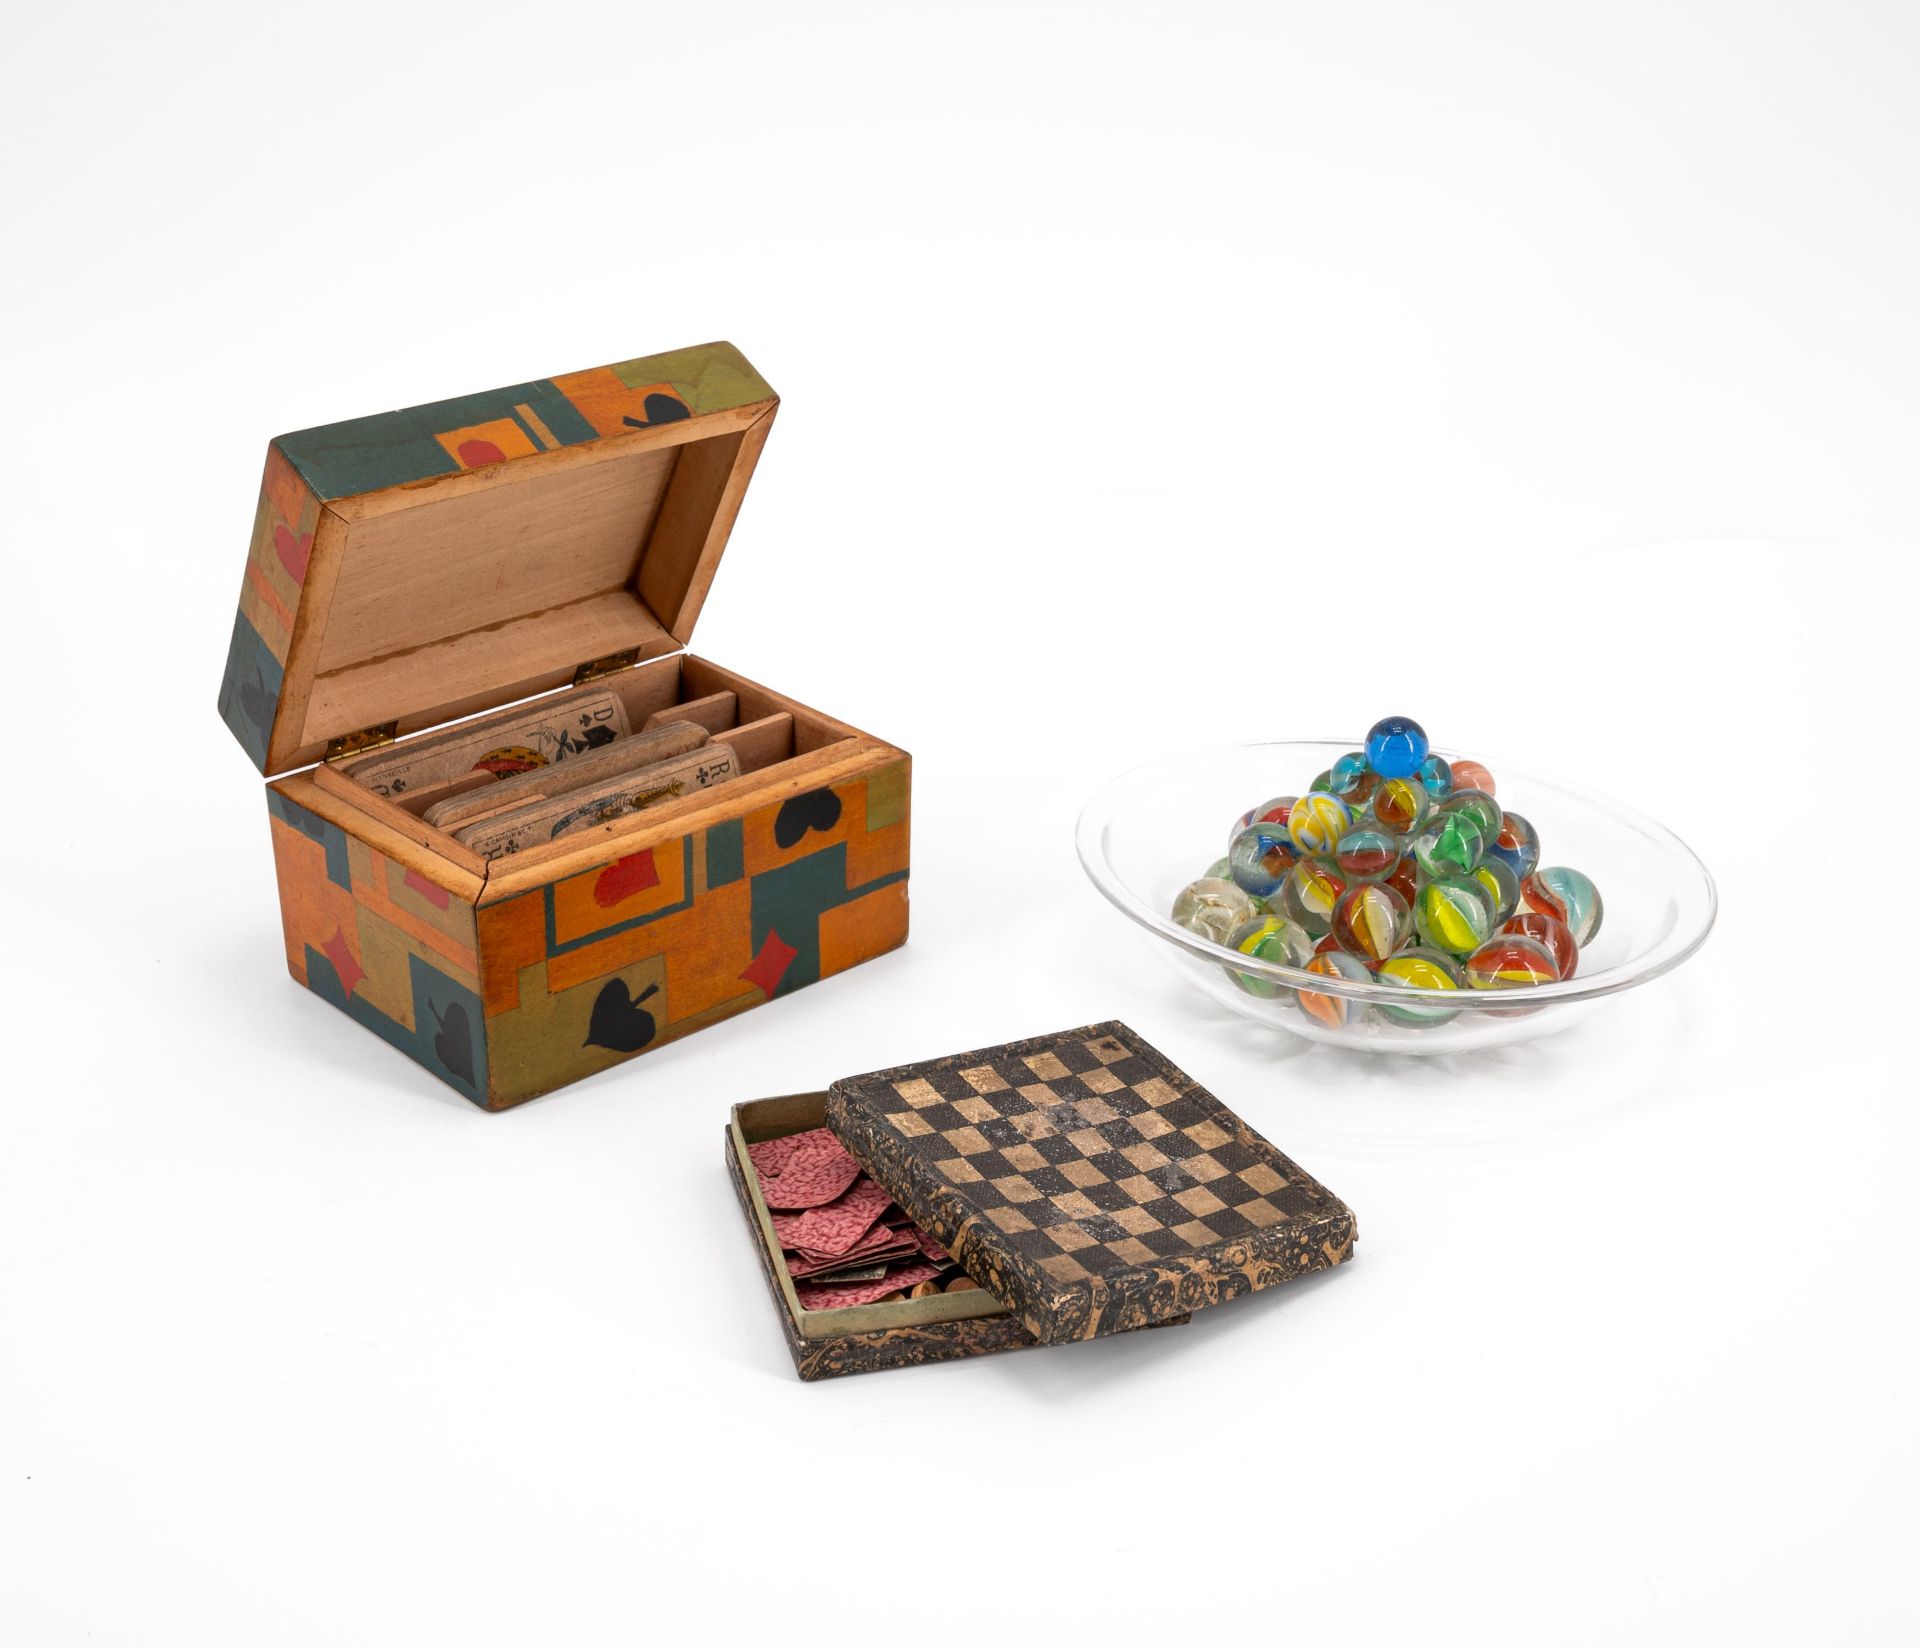 Germany: MINIATURE WOODEN GAME BOX, SET OF GLASS MARBLES AND PLAYING CARD BOX